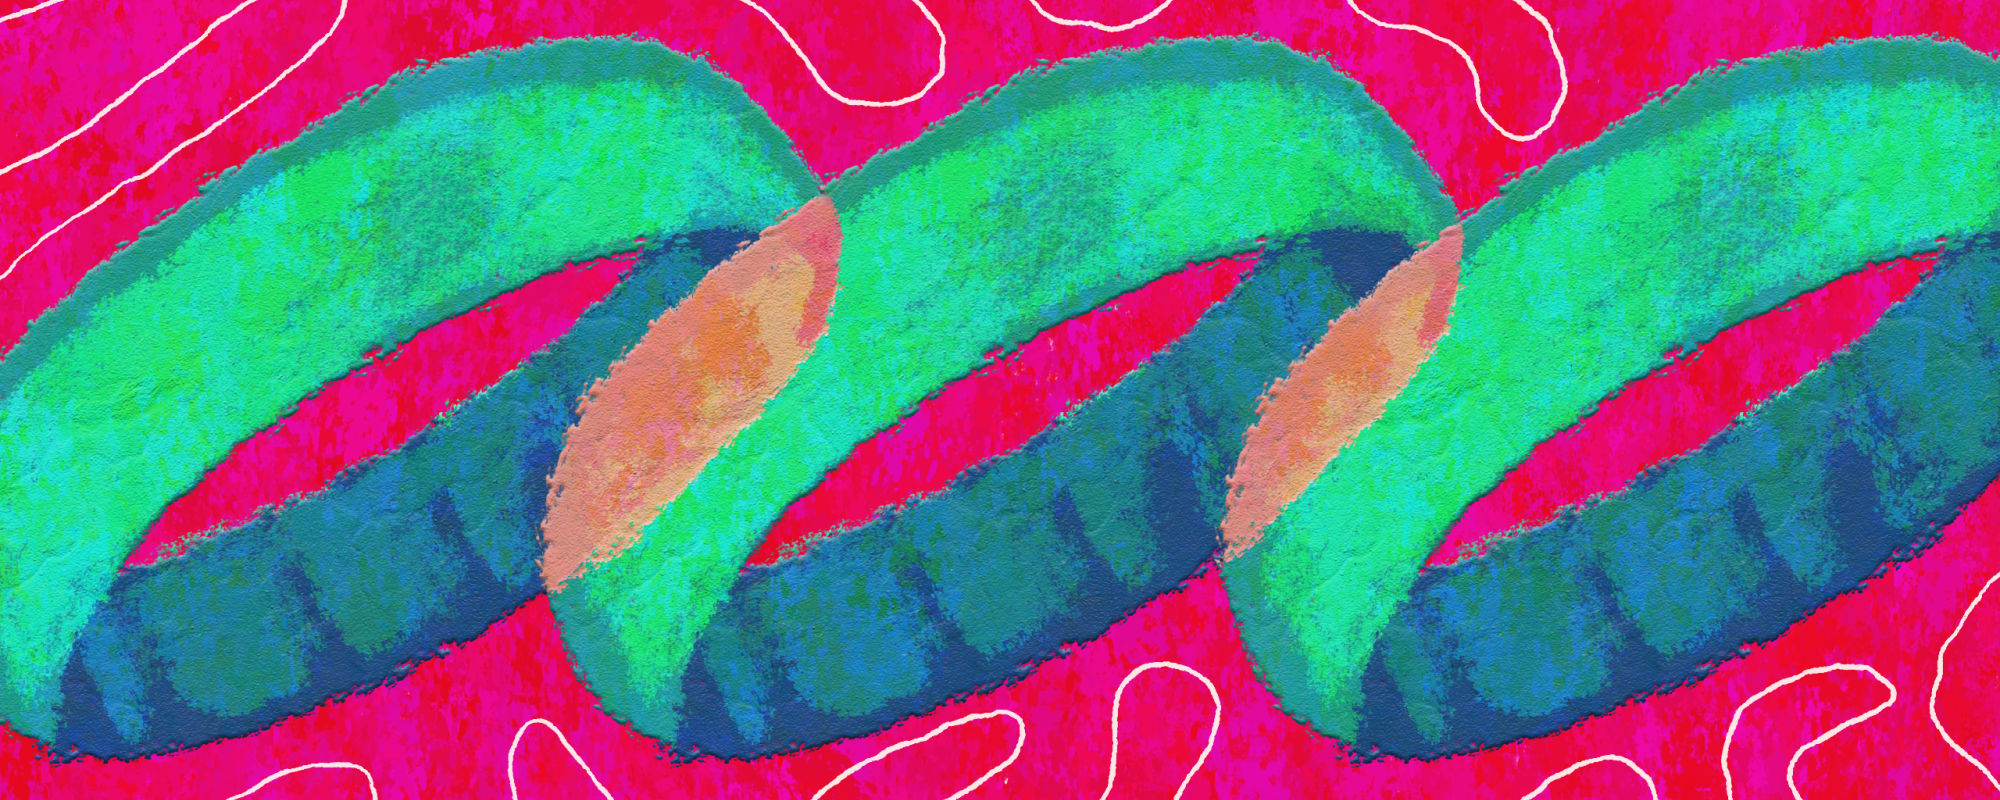 Three green wedding rings on a pink background